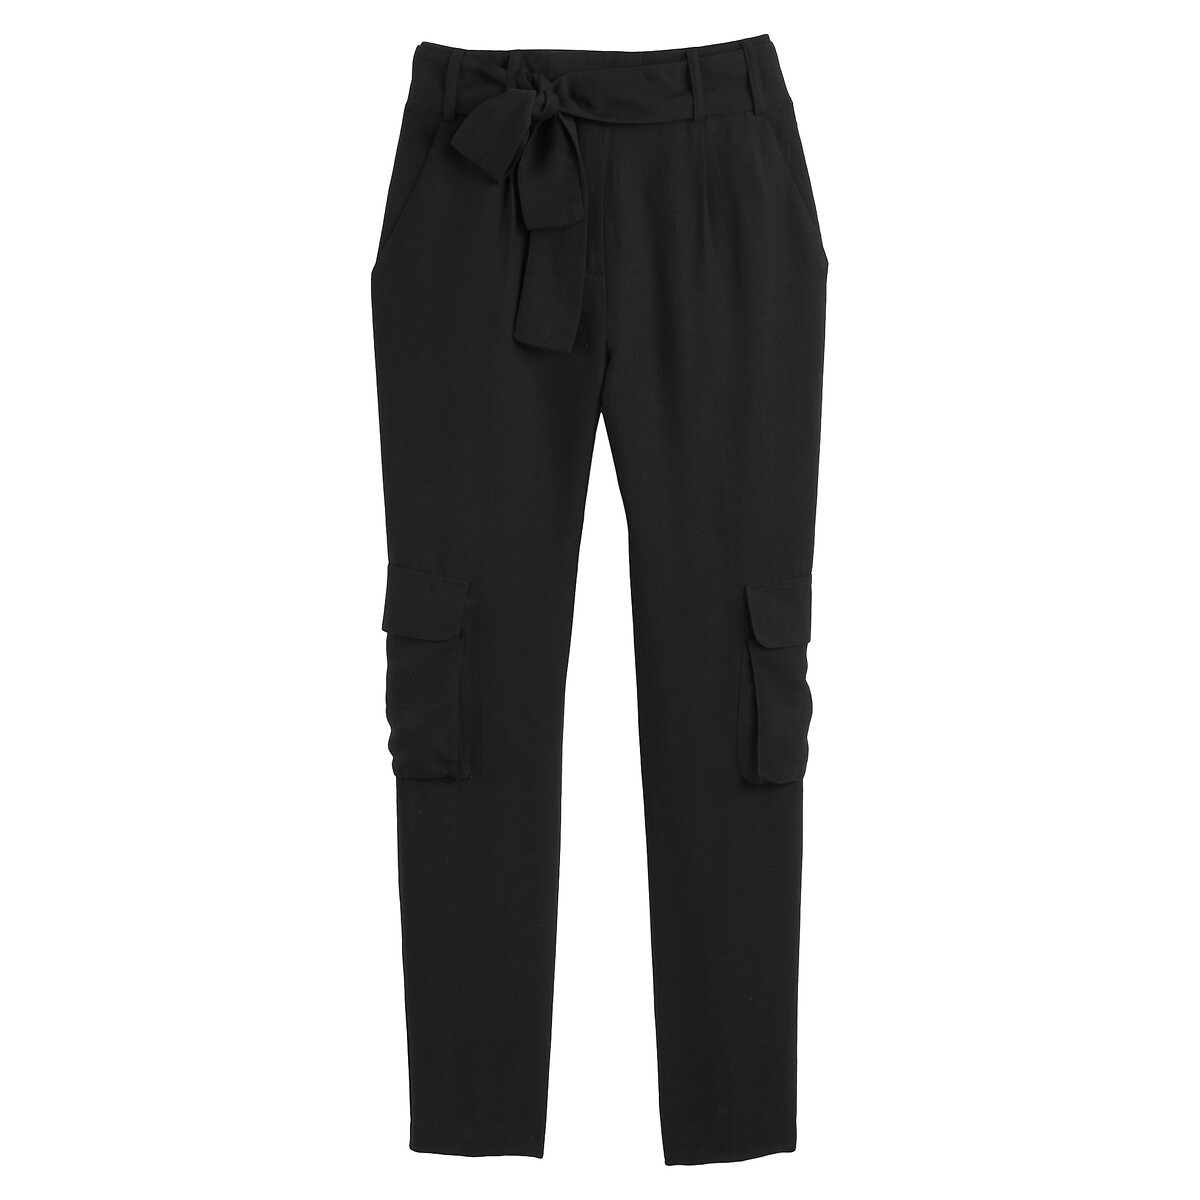 Cigarette Trousers with Utility Pockets, Length 30"